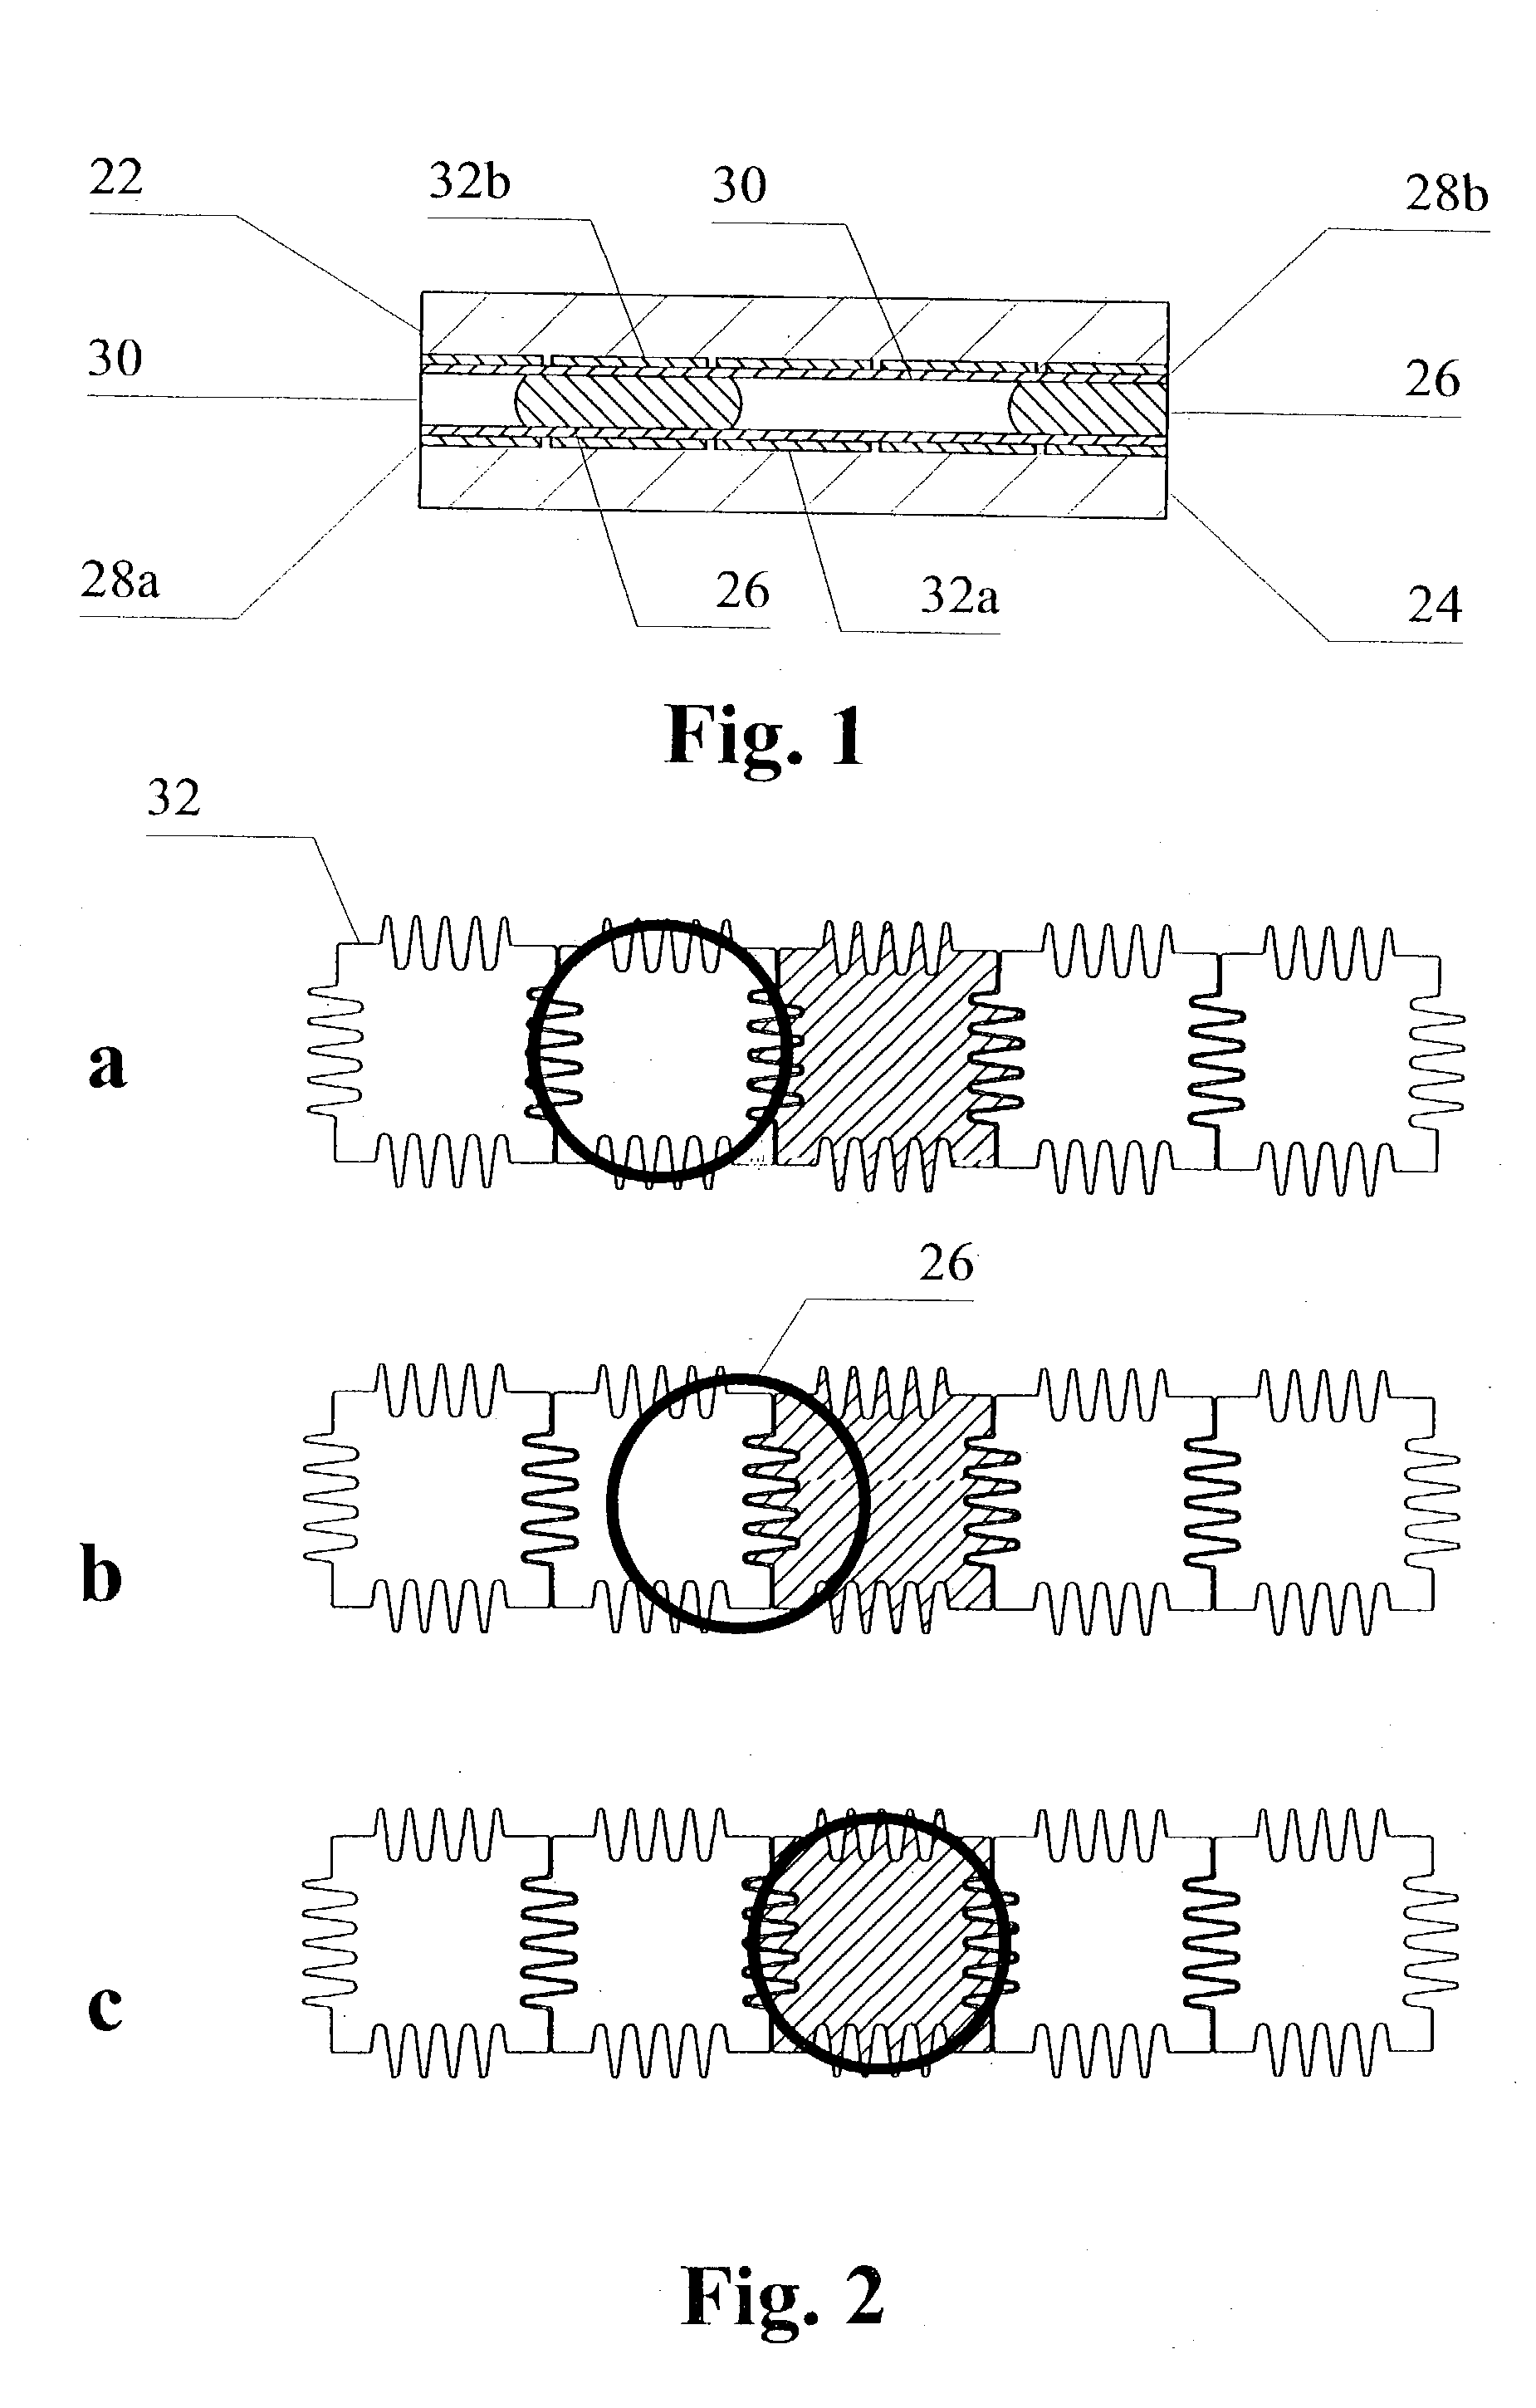 Method of using actuators for microfluidics without moving parts